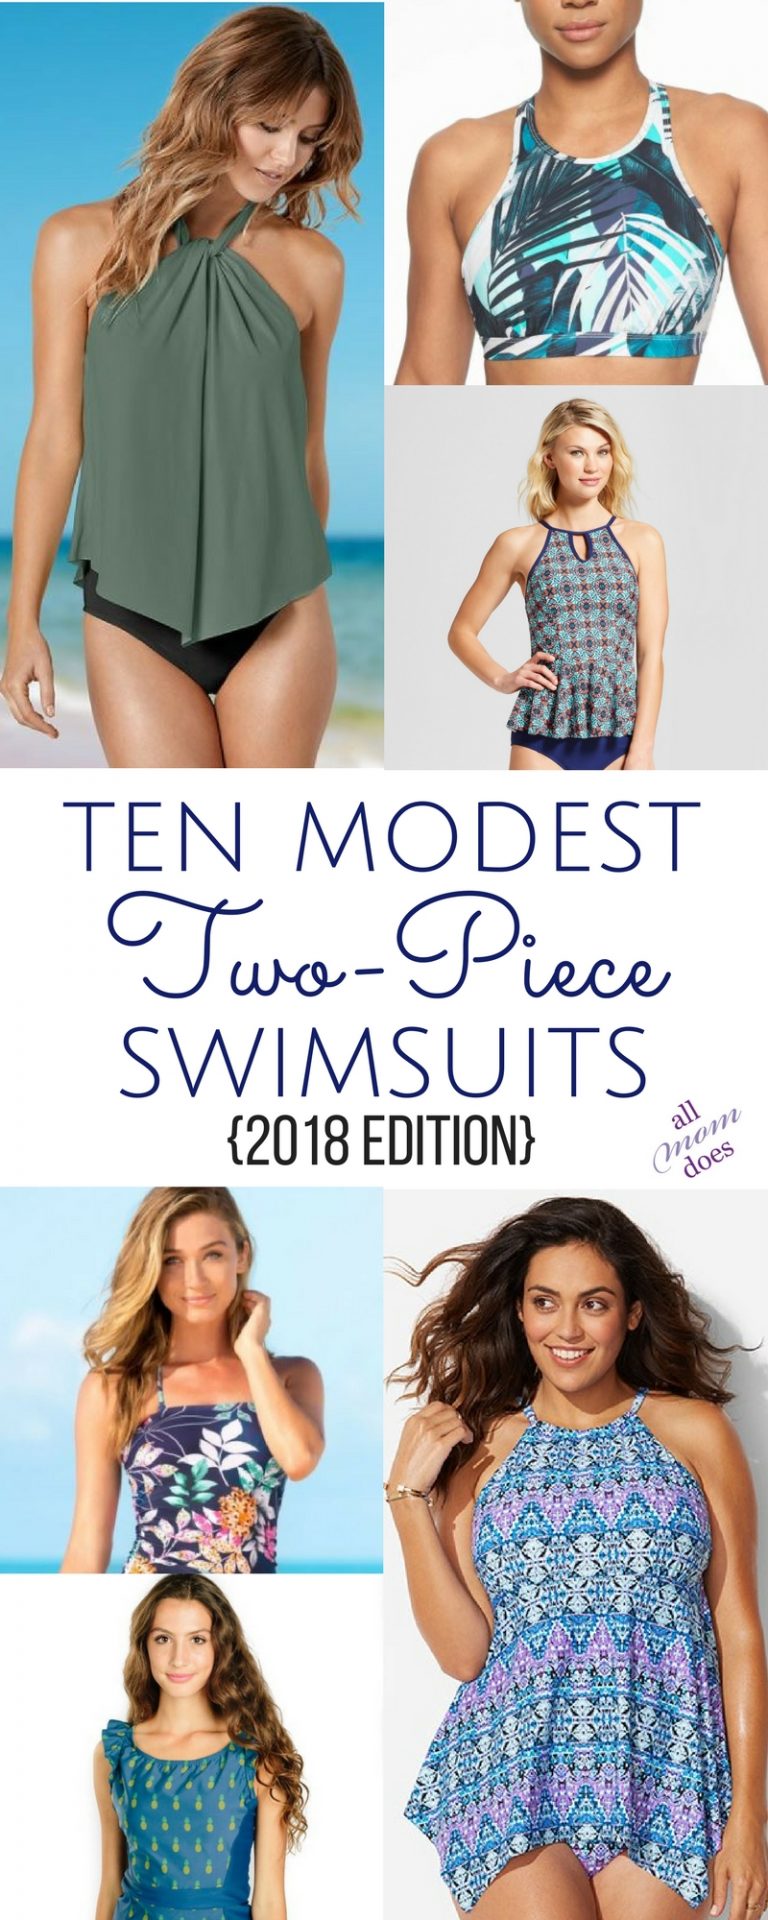 10 Modest Two Piece Swimsuits 2018 Edition Allmomdoes 1801